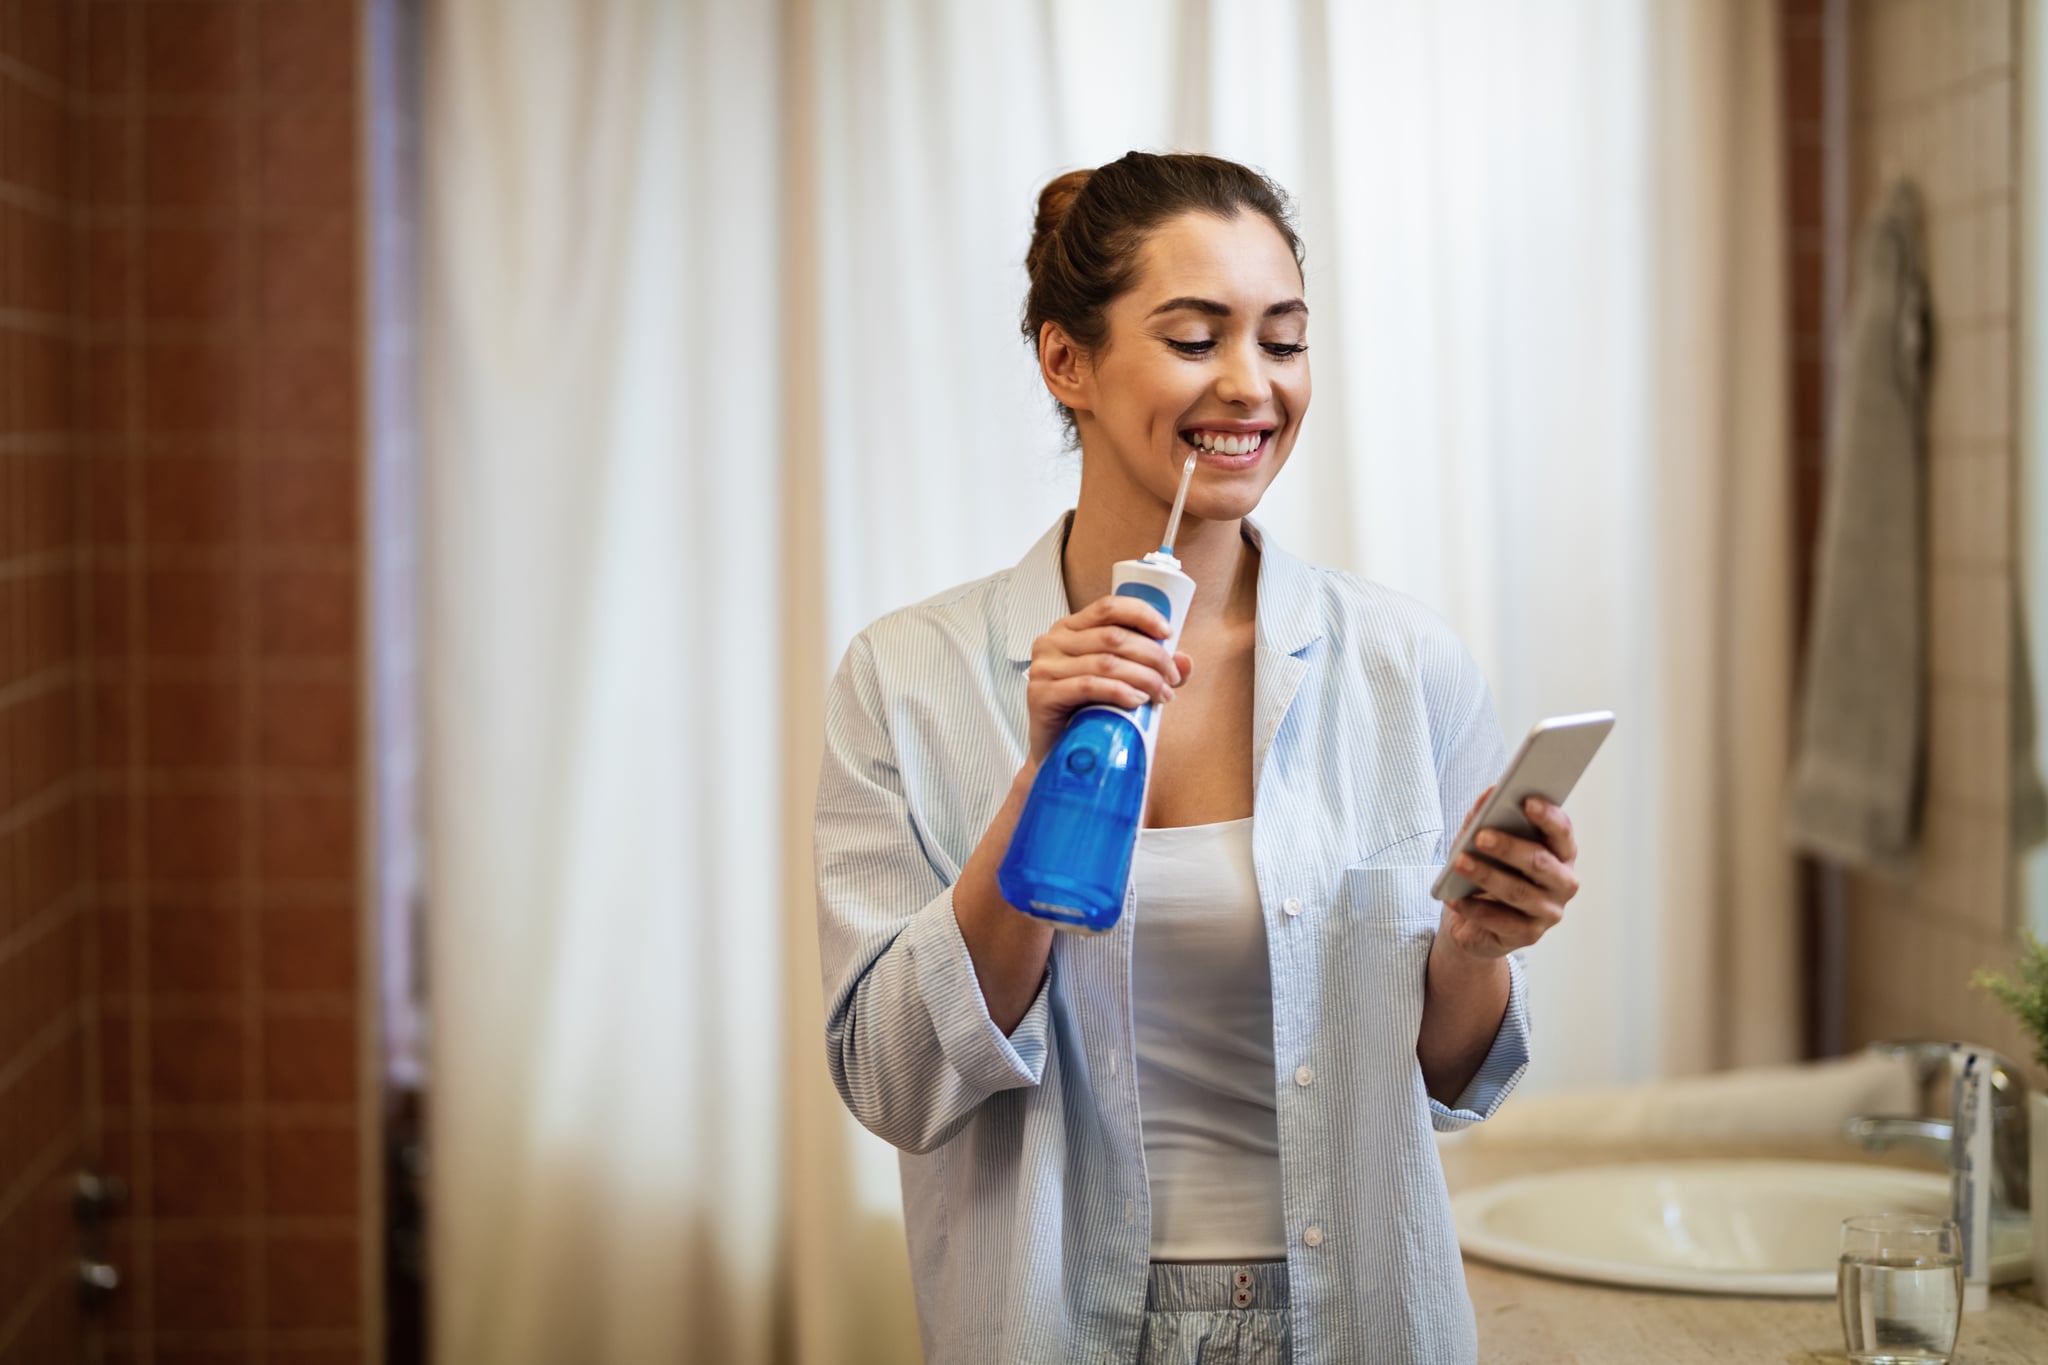 Young happy woman using dental water flosser and cleaning her teeth while texting on mobile phone in the bathroom.